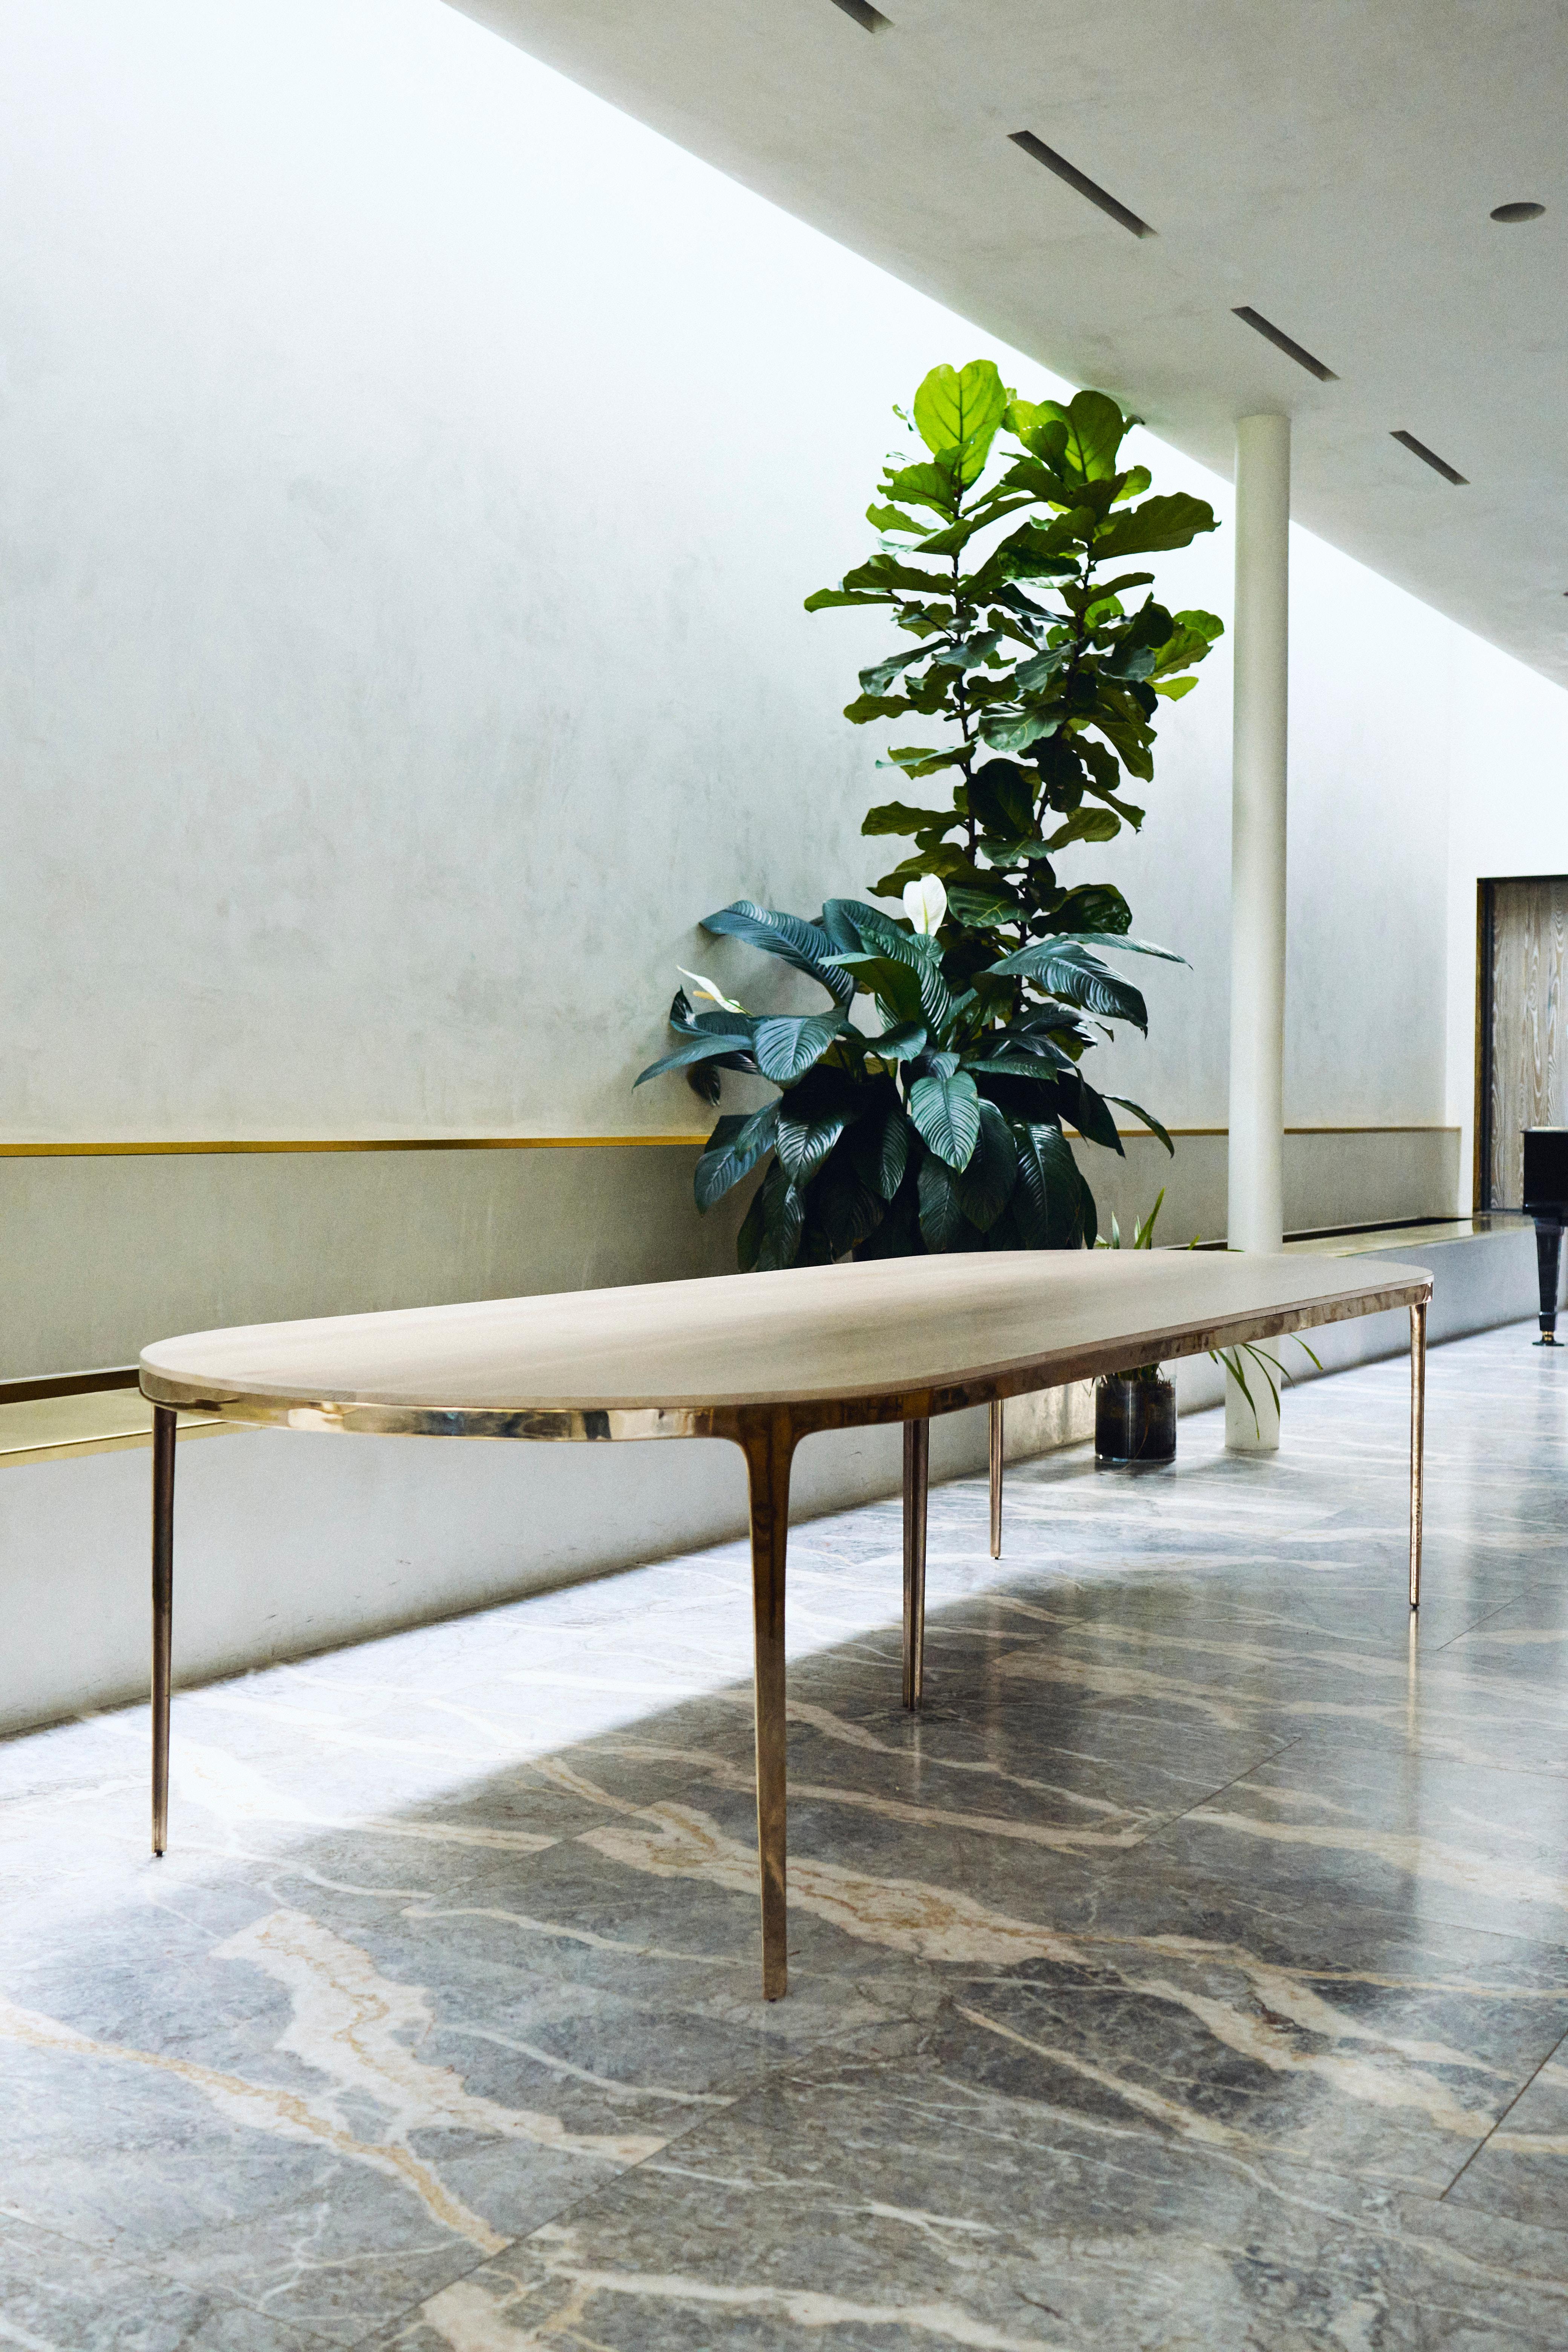 Designed by Daniel Barbera, the 'Bronze' table is a Minimalist oval table consisting of Classic geometry on the exterior merged with organic flowing underside. The four legged sandcast solid bronze base is hand finished to a smooth mirror polish,